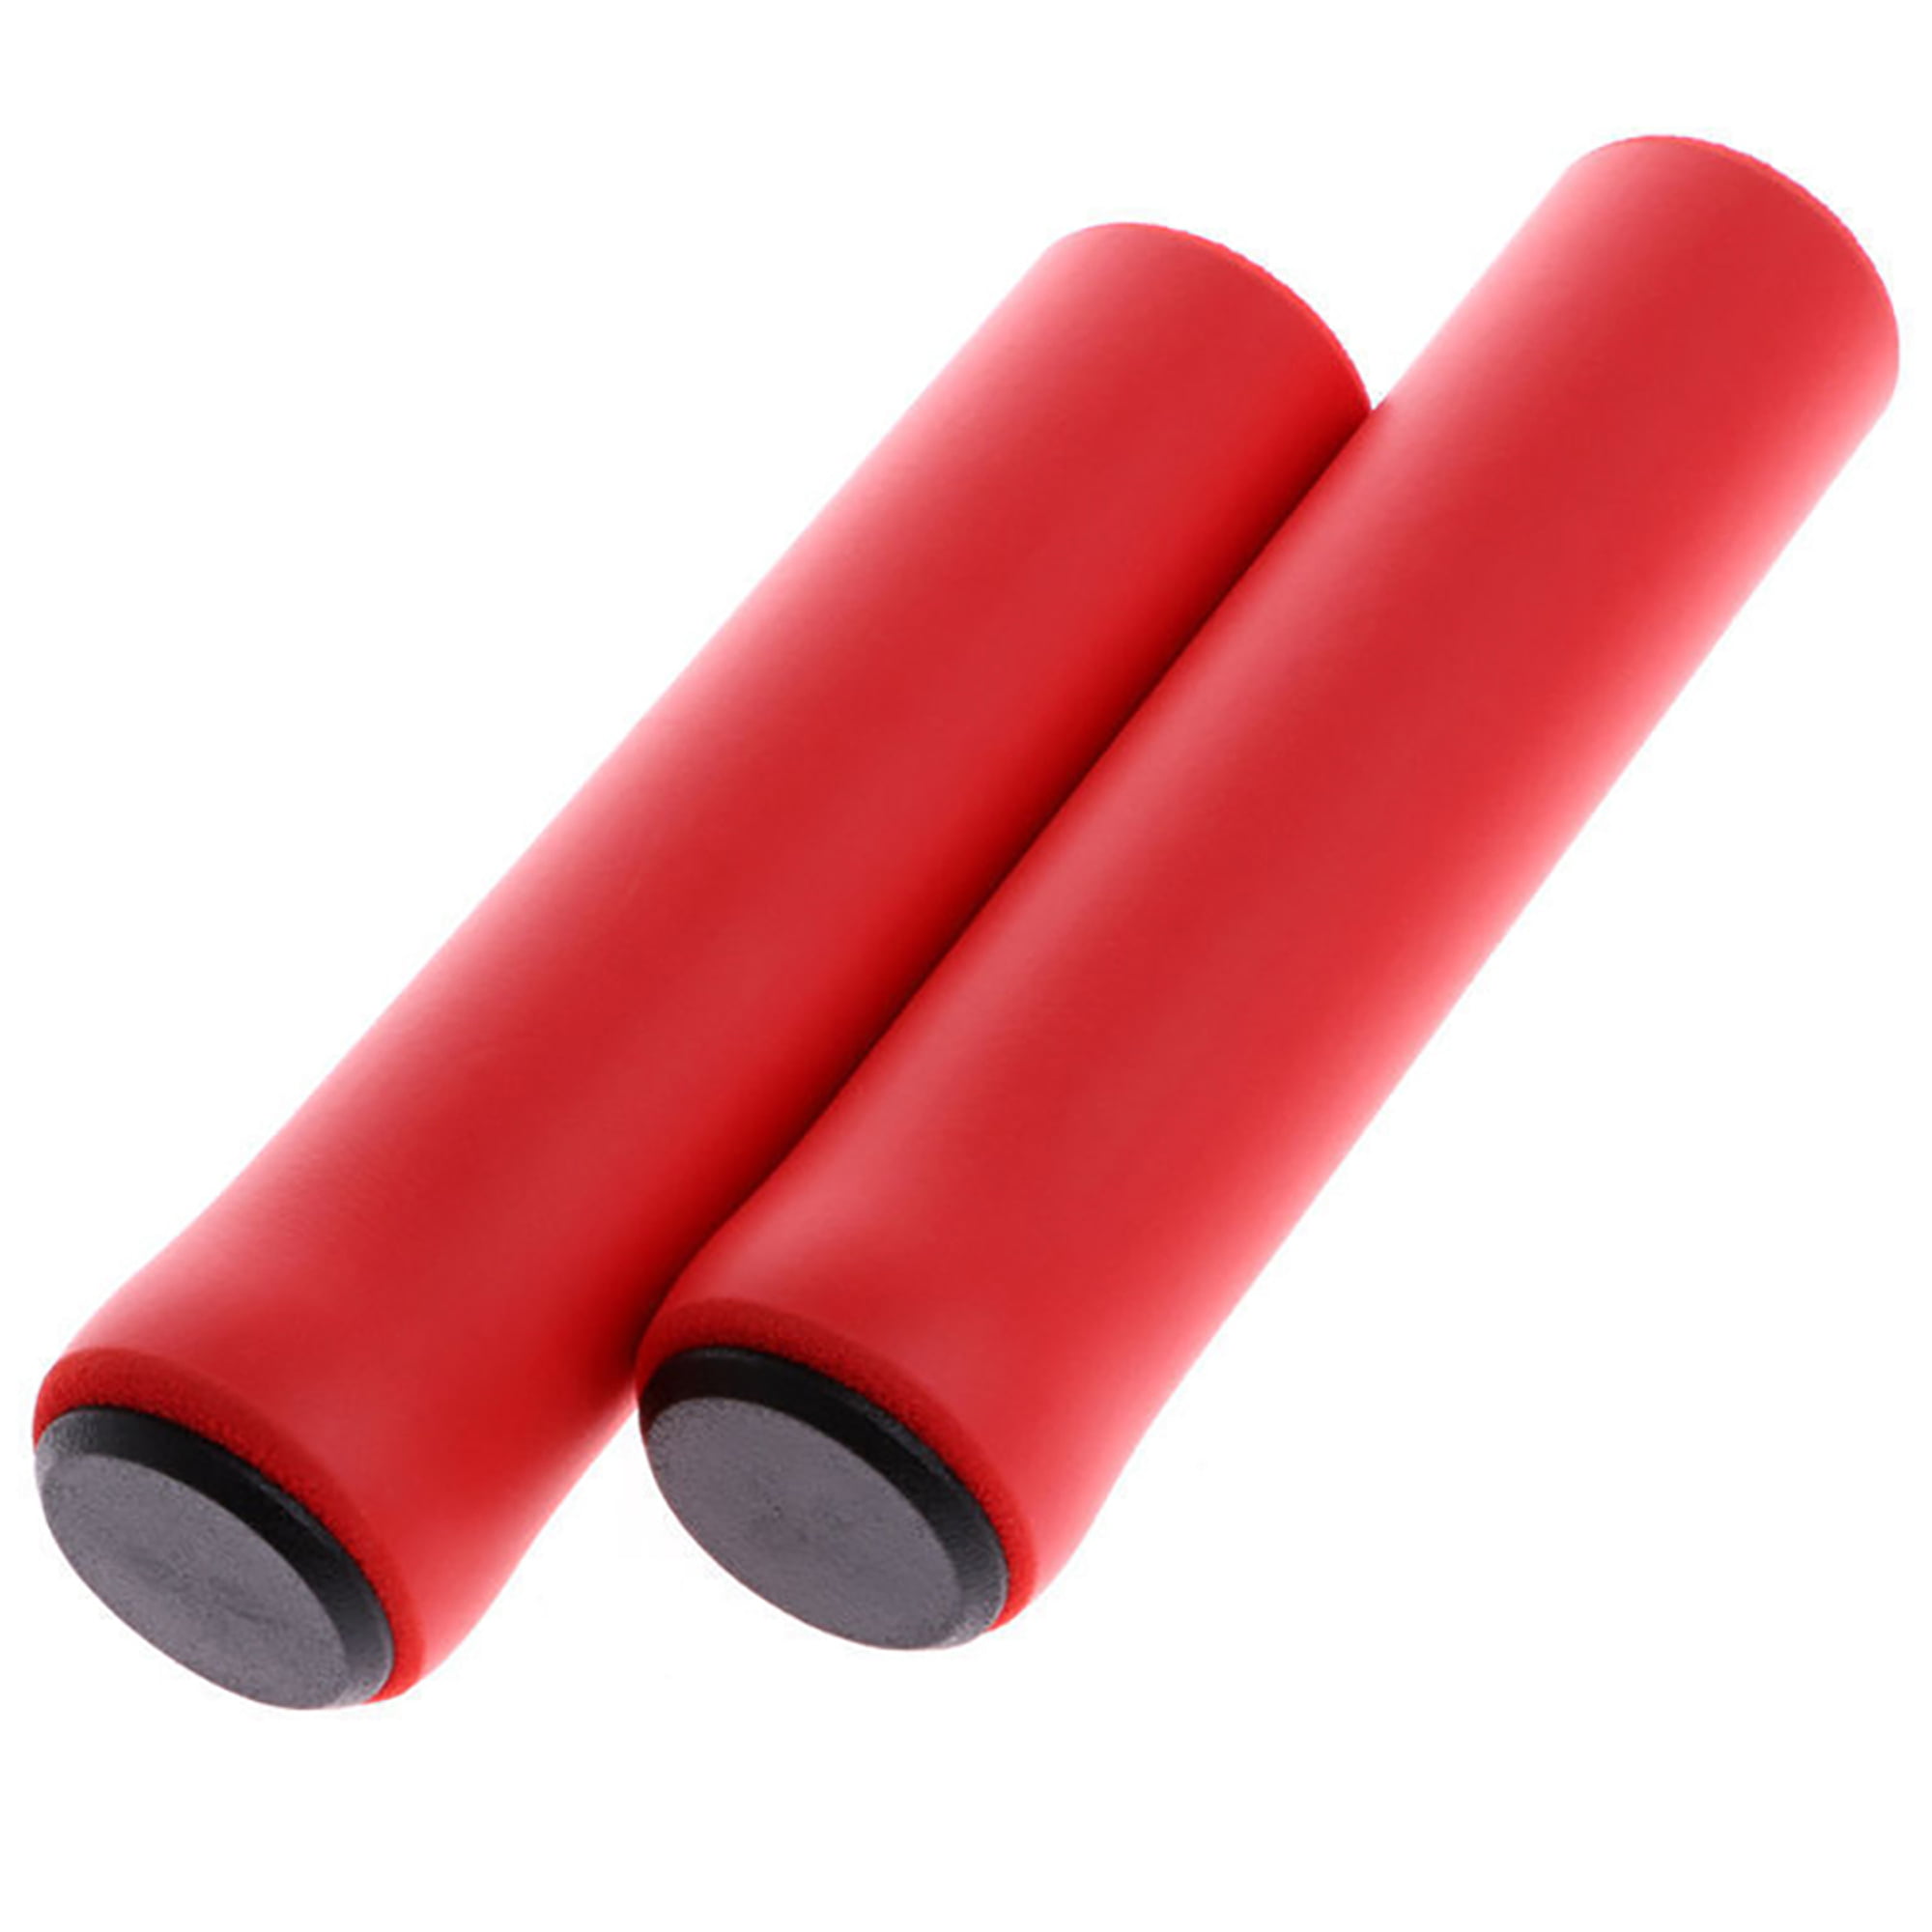 Details about   Silicone Mountain Bike Handle Bar Bicycle Cycling Soft Foam Grip Anti-Slip 